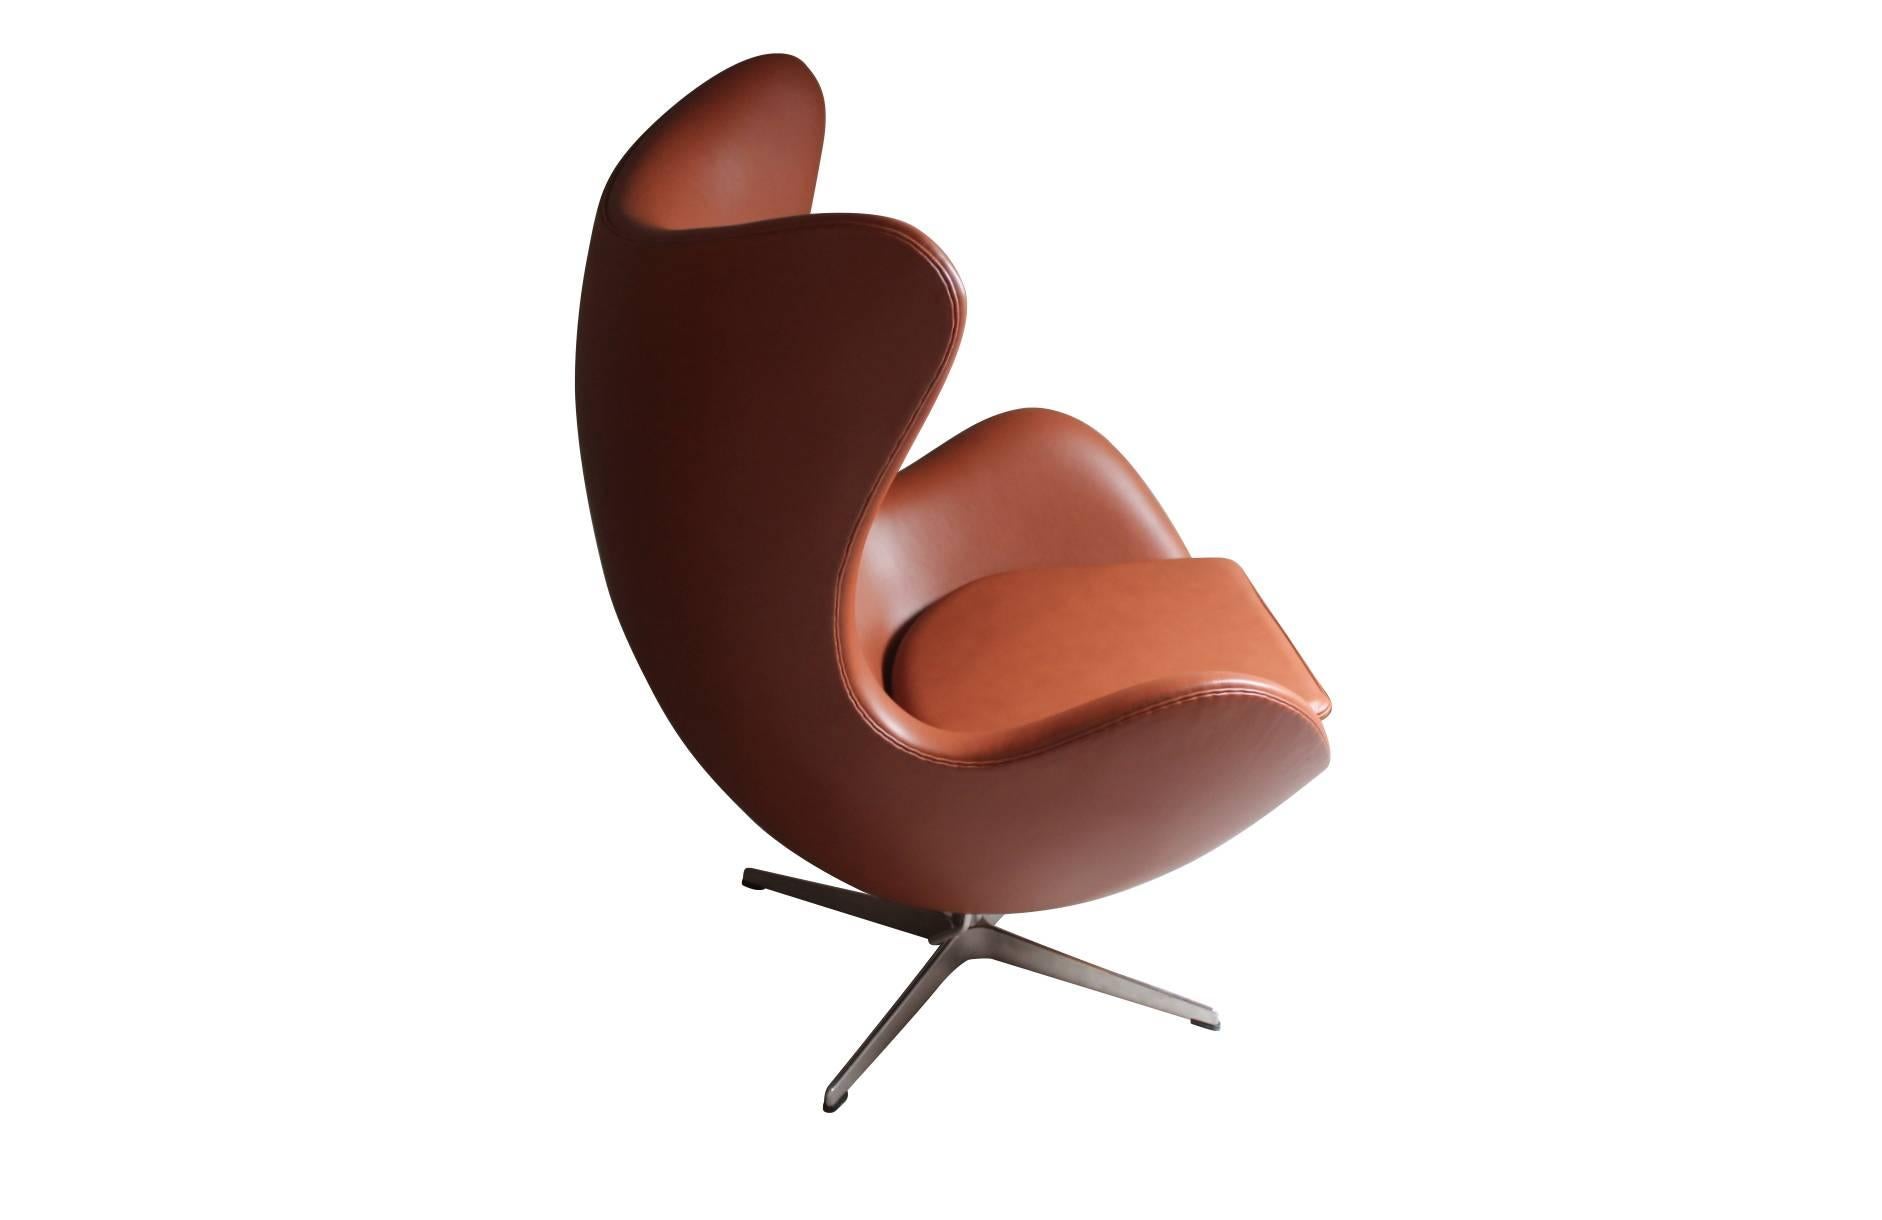 The Egg designed by Arne Jacobsen in 1958 and manufactured by Fritz Hansen in the late 1980s. The chair is originally upholstered in cognac colored classic leather. We have one more in the exact same leather in stock.